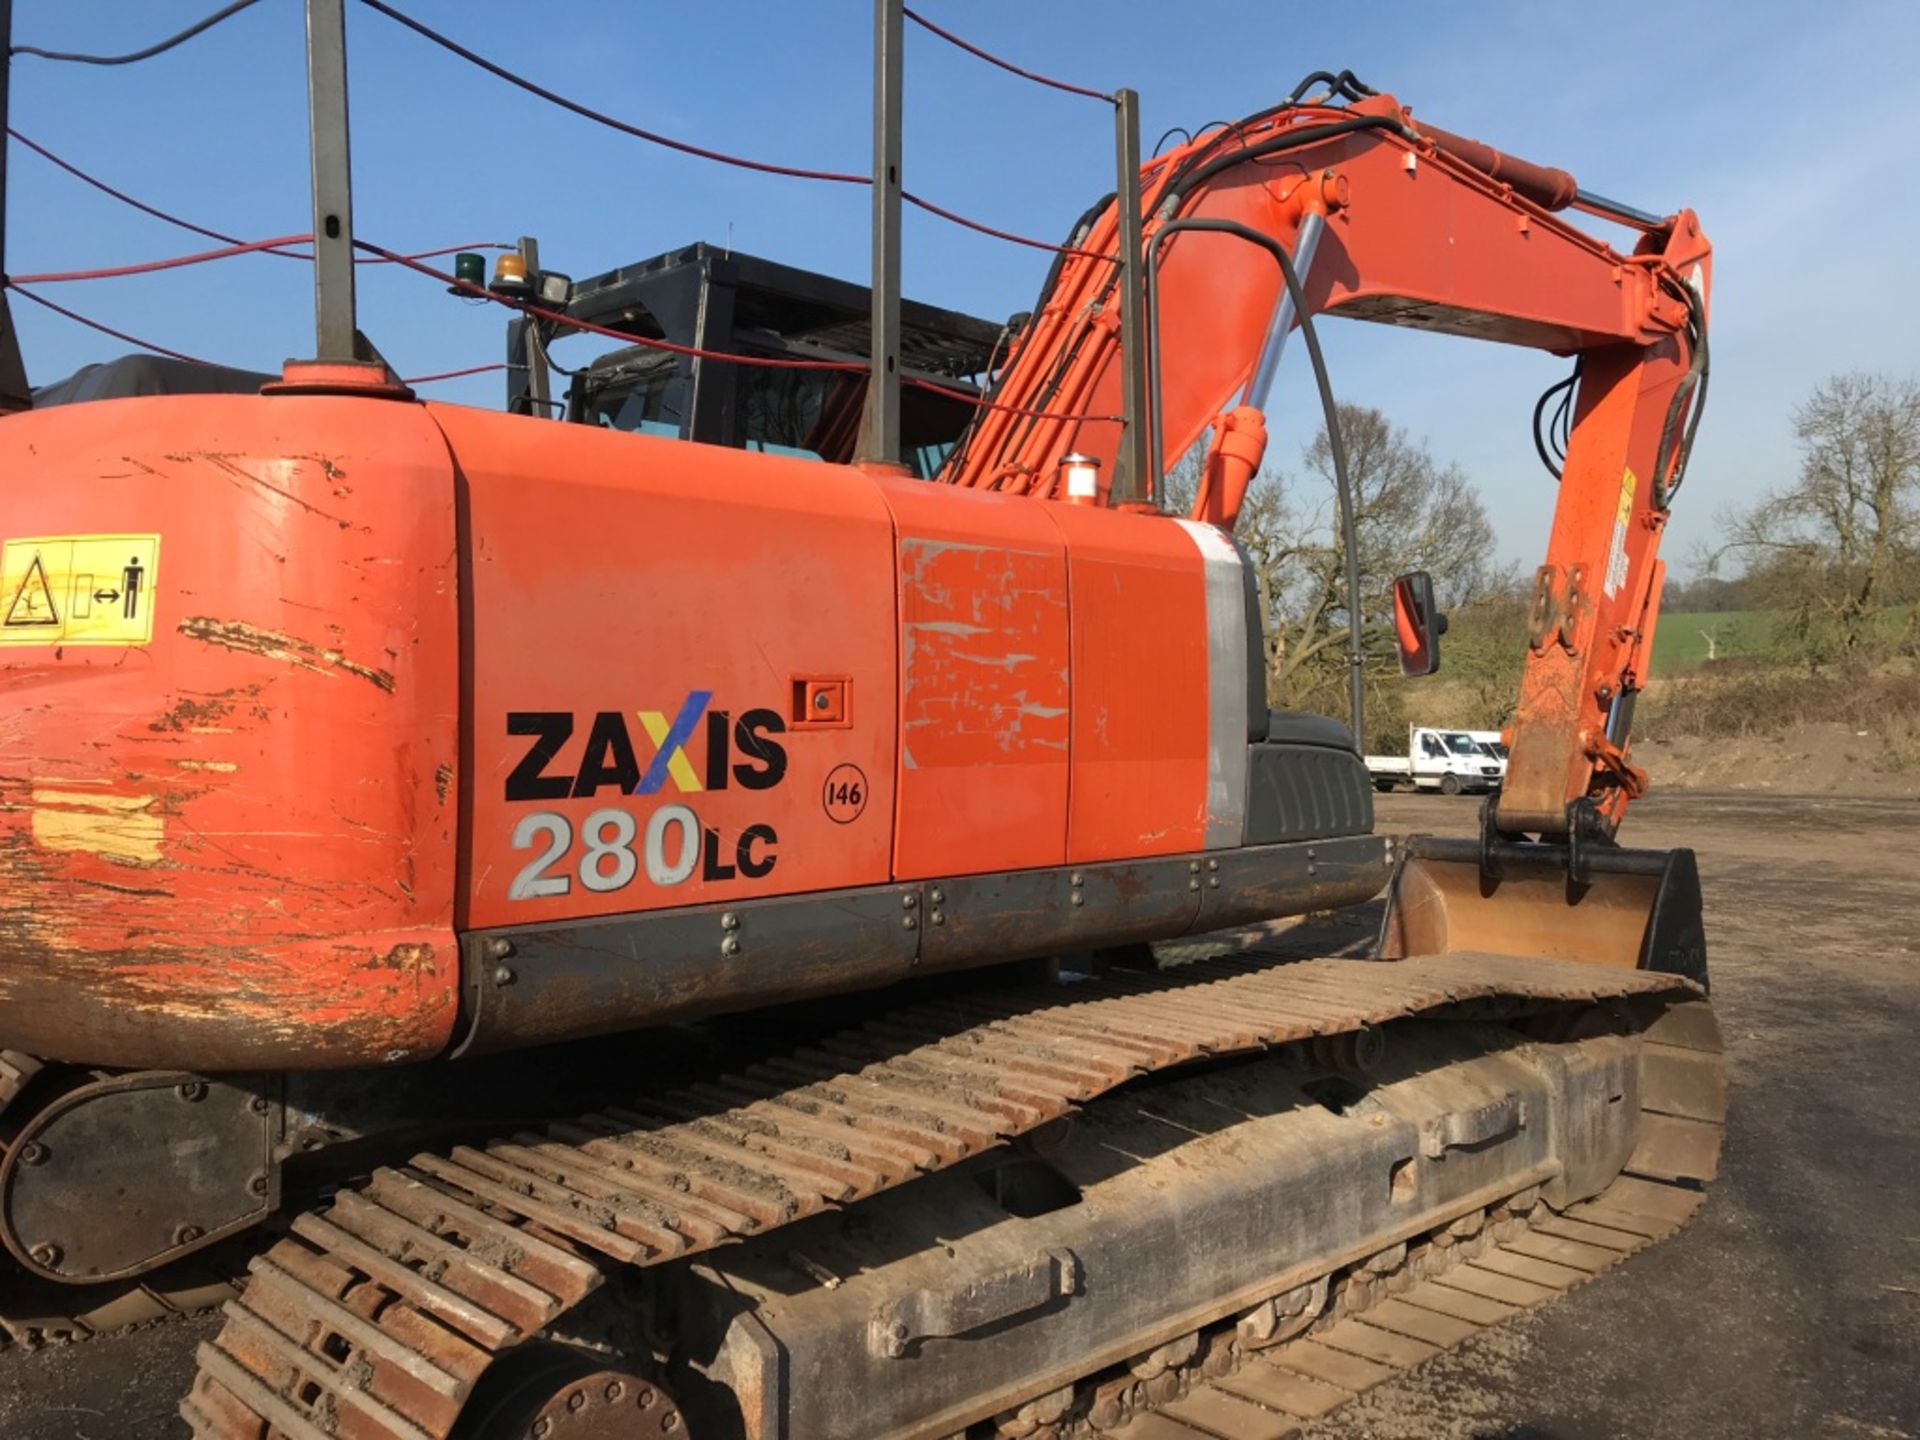 HITACHI ZX280 EXCAVATOR WITH 2 BUCKETS YEAR 2012 9461 REC HRS SN:HCMBFK00J00032830 WHEN TESTED WAS - Image 9 of 9